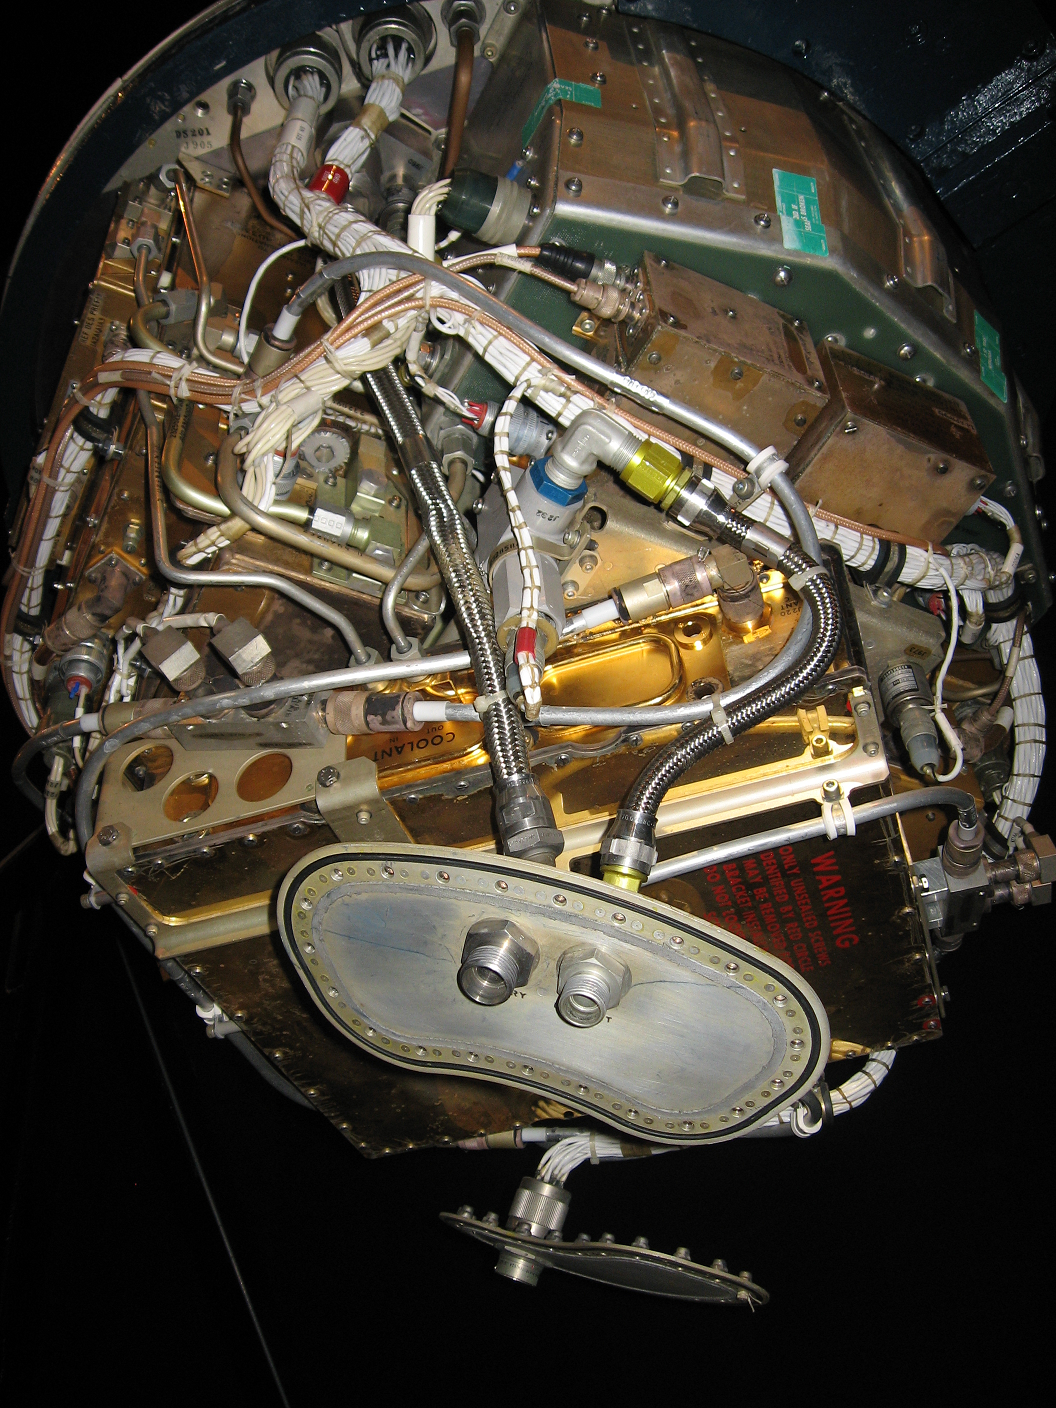 The business end of the ERCS. The payload had two transmitters that sent launch code messages down to earth. <em>Tdrss/Wikicommons</em>